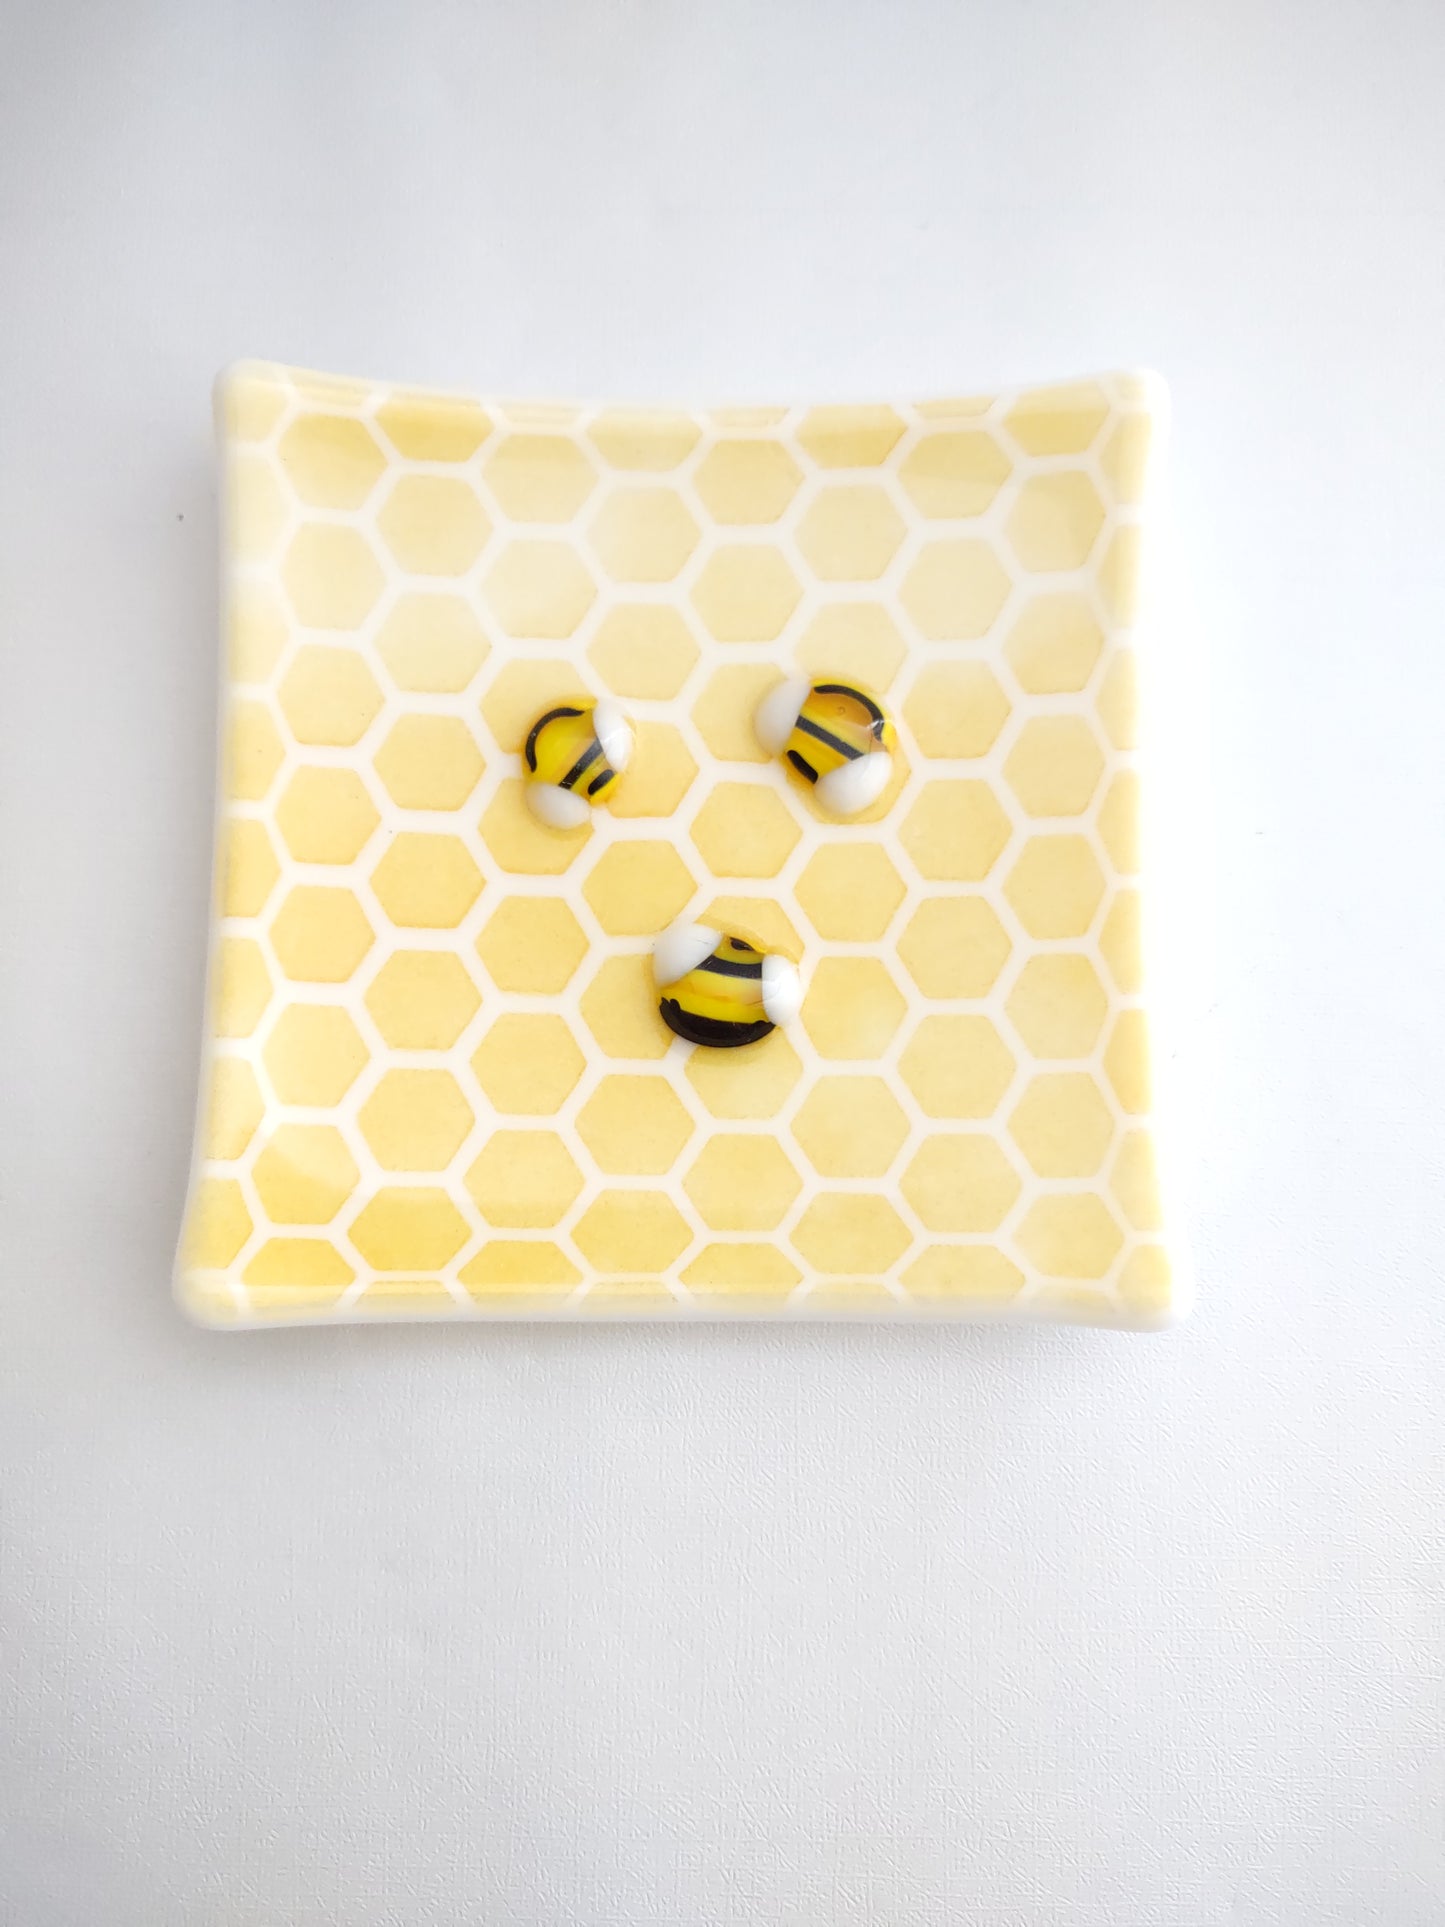 Larger Honeycomb with Bee Glass Trinket Dish